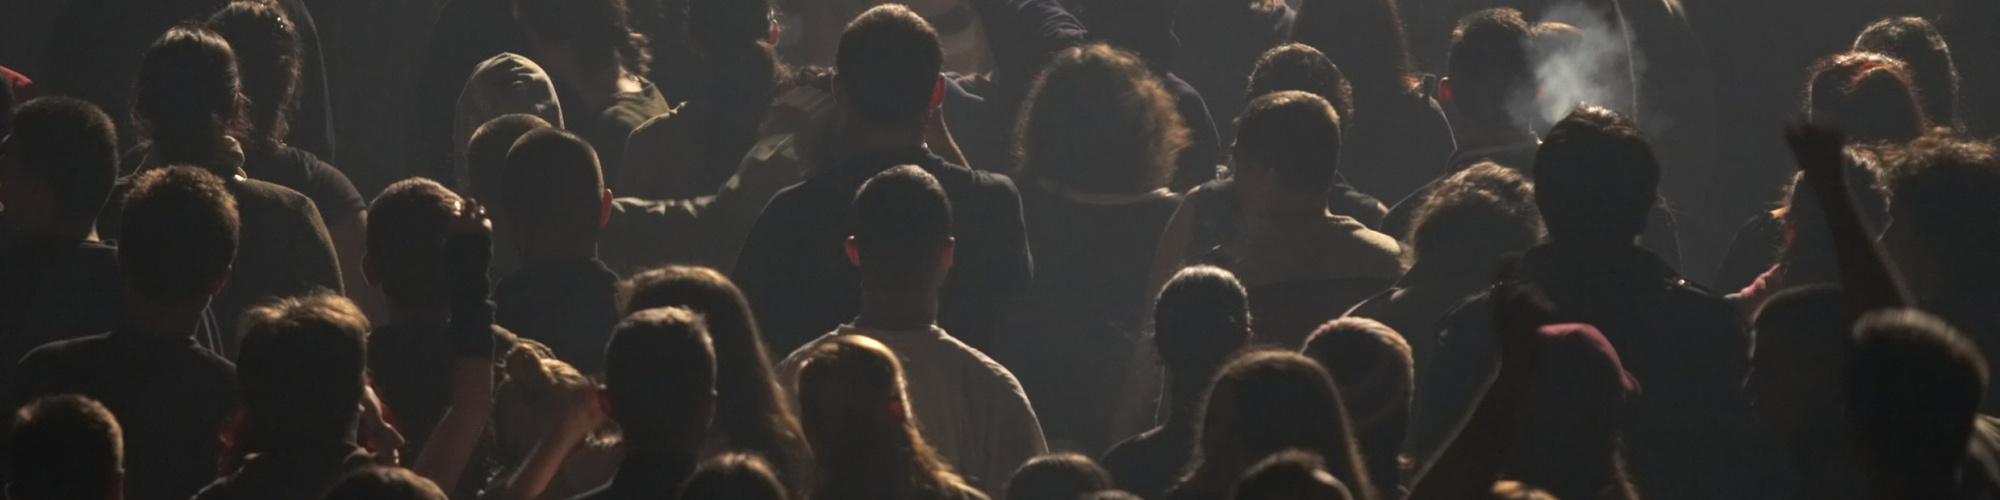 A crowd of people backlit at a concert or protest